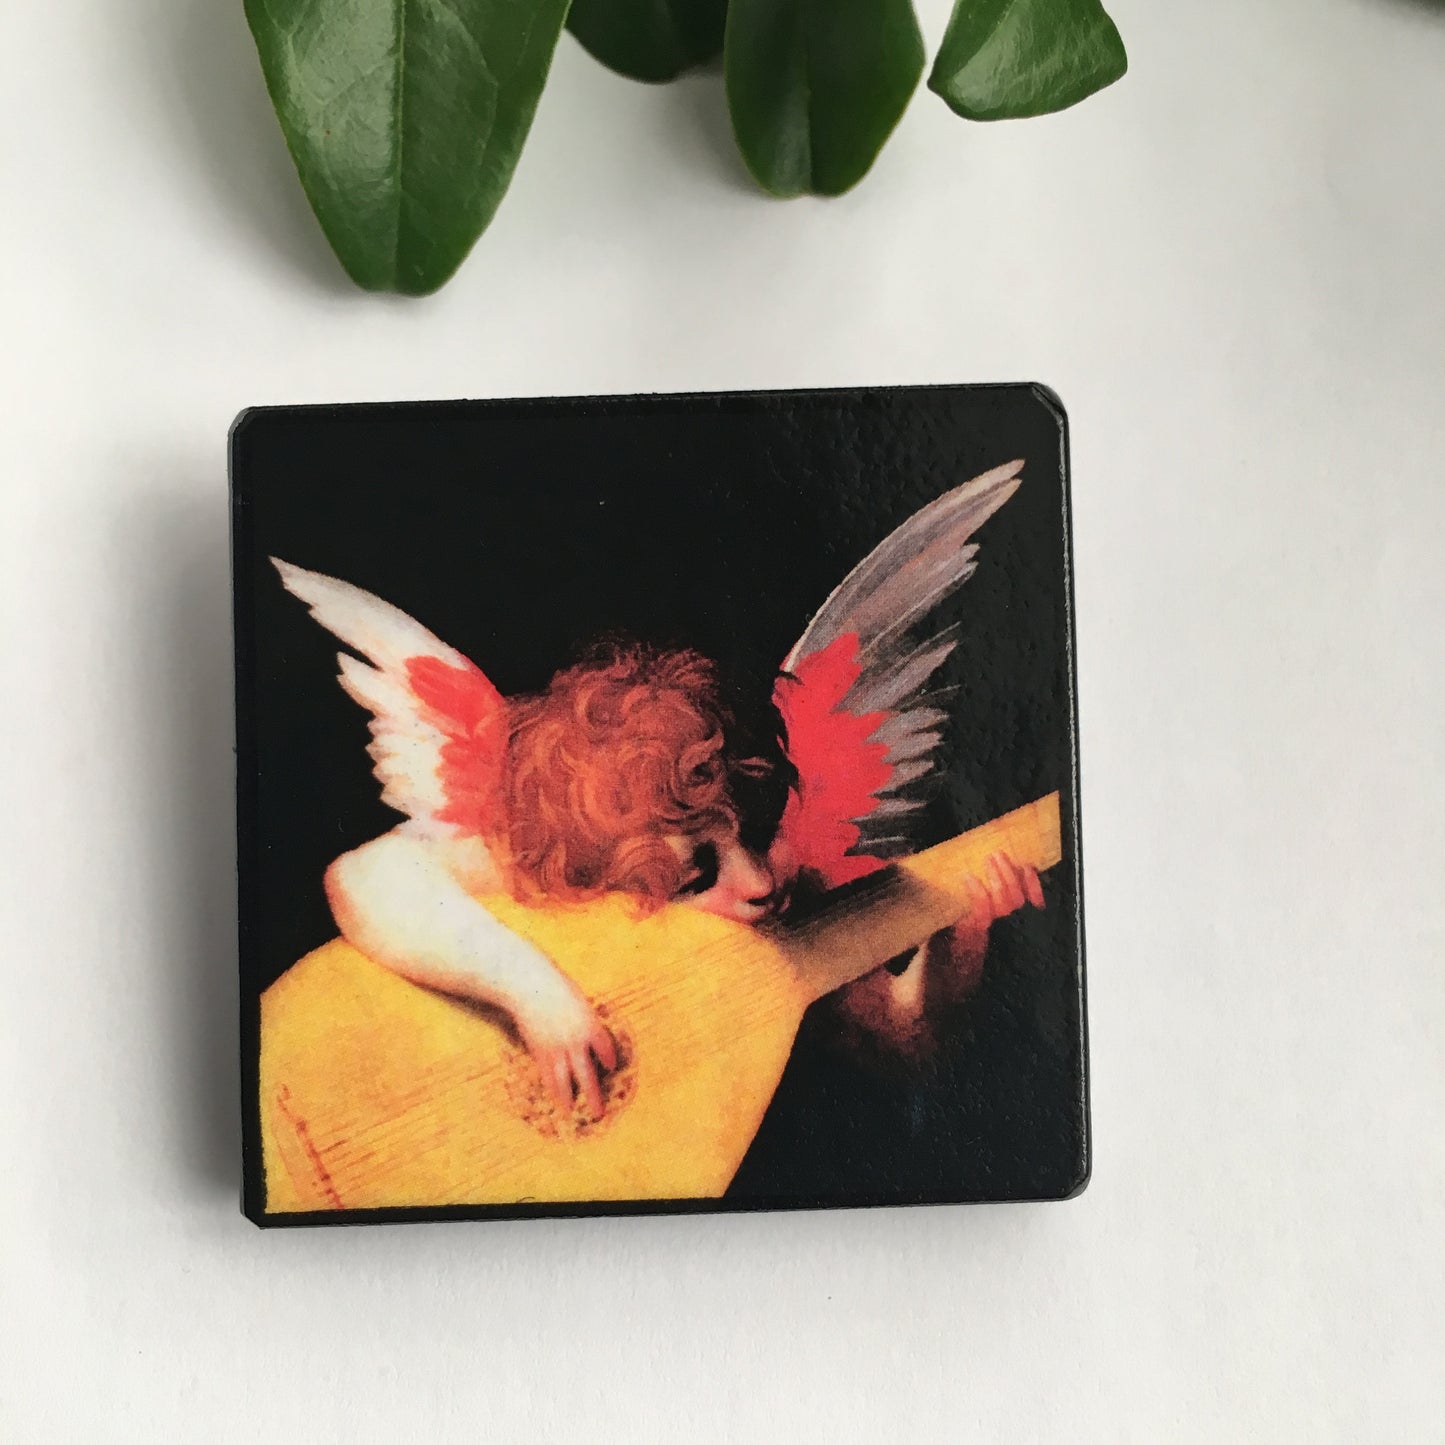 Wooden square brooch pin jewellery with an oil painting image by the Renaissance Italian artist Rosso Fiorentino. Dimensions approx. 4.3cm each side and c. 4mm in depth. Finished with Pin back, silver-plated steel, 4 cm with locking bar lead and nickel free, the brooch is backed with black velvet. 